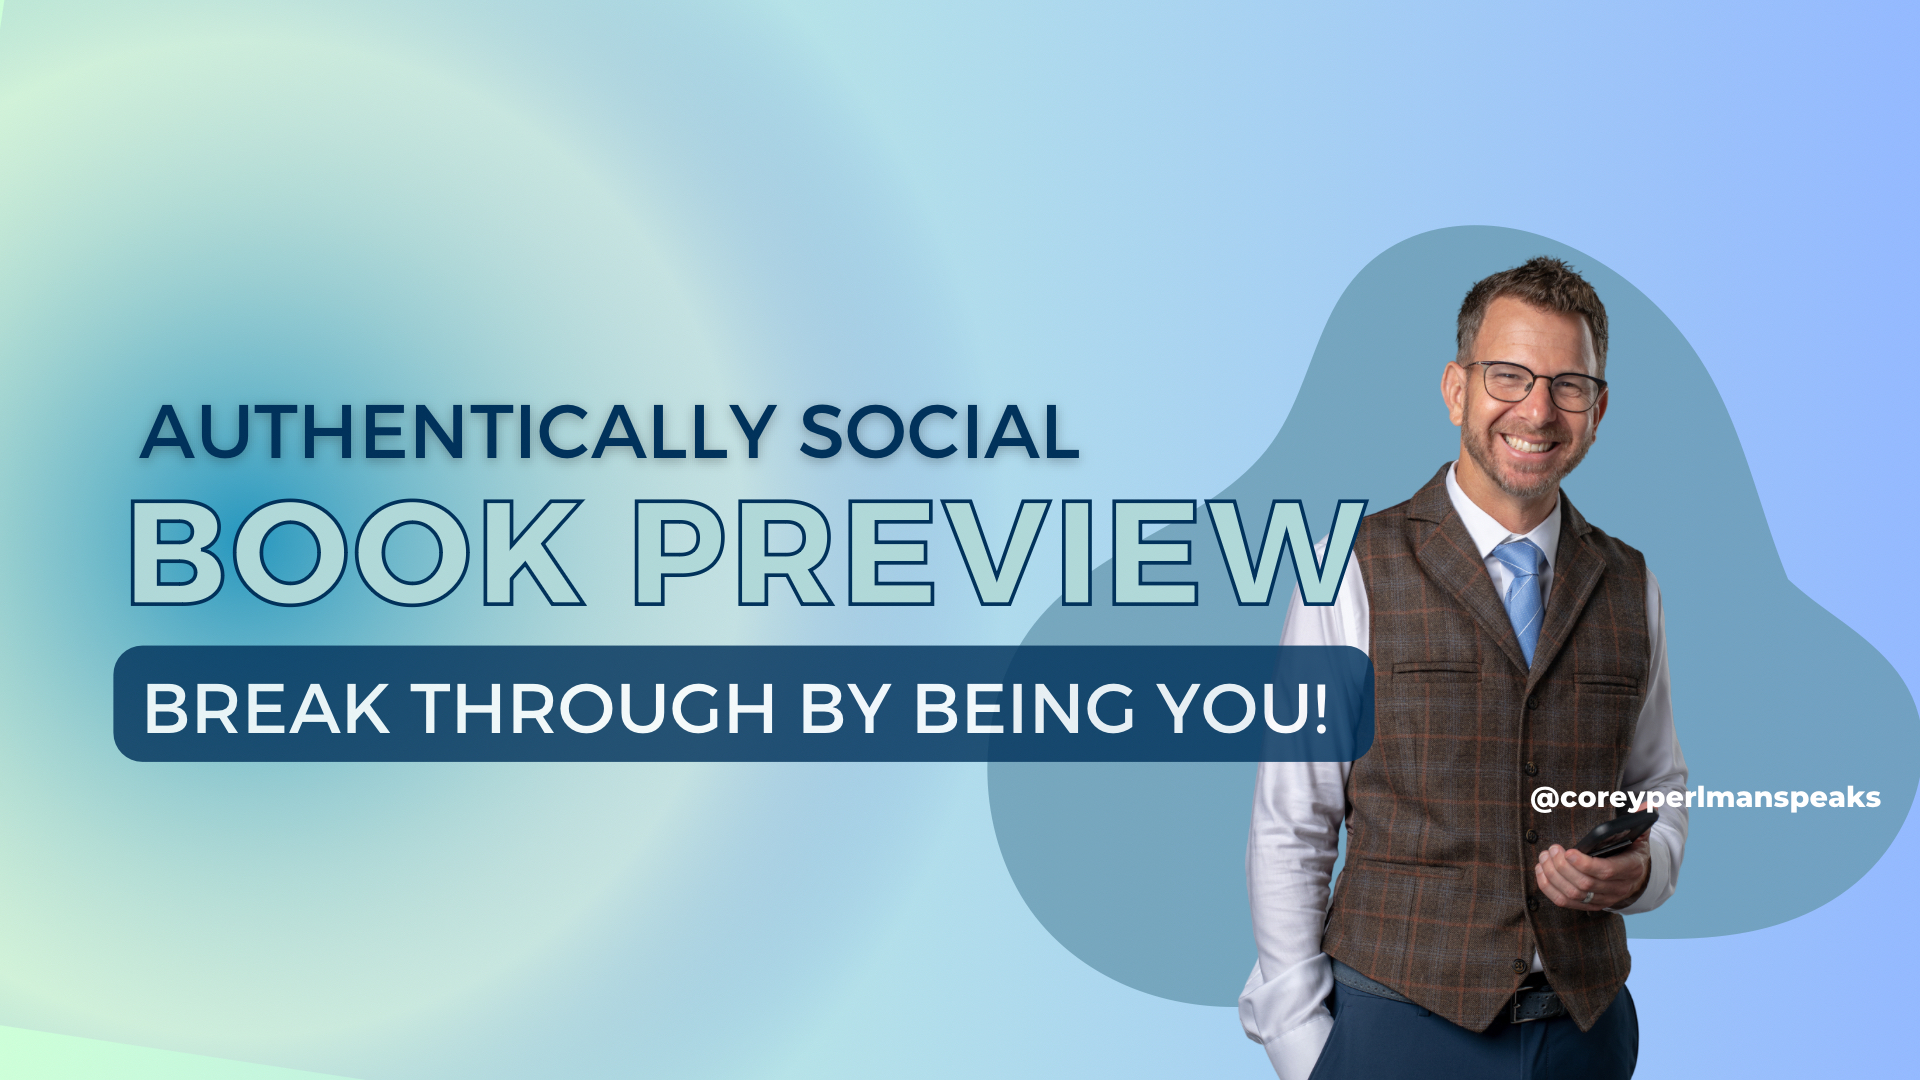 Man in suit wearing glasses in front of a gradient blue background with writing that says Authentically Social Book Preview Break through by being you